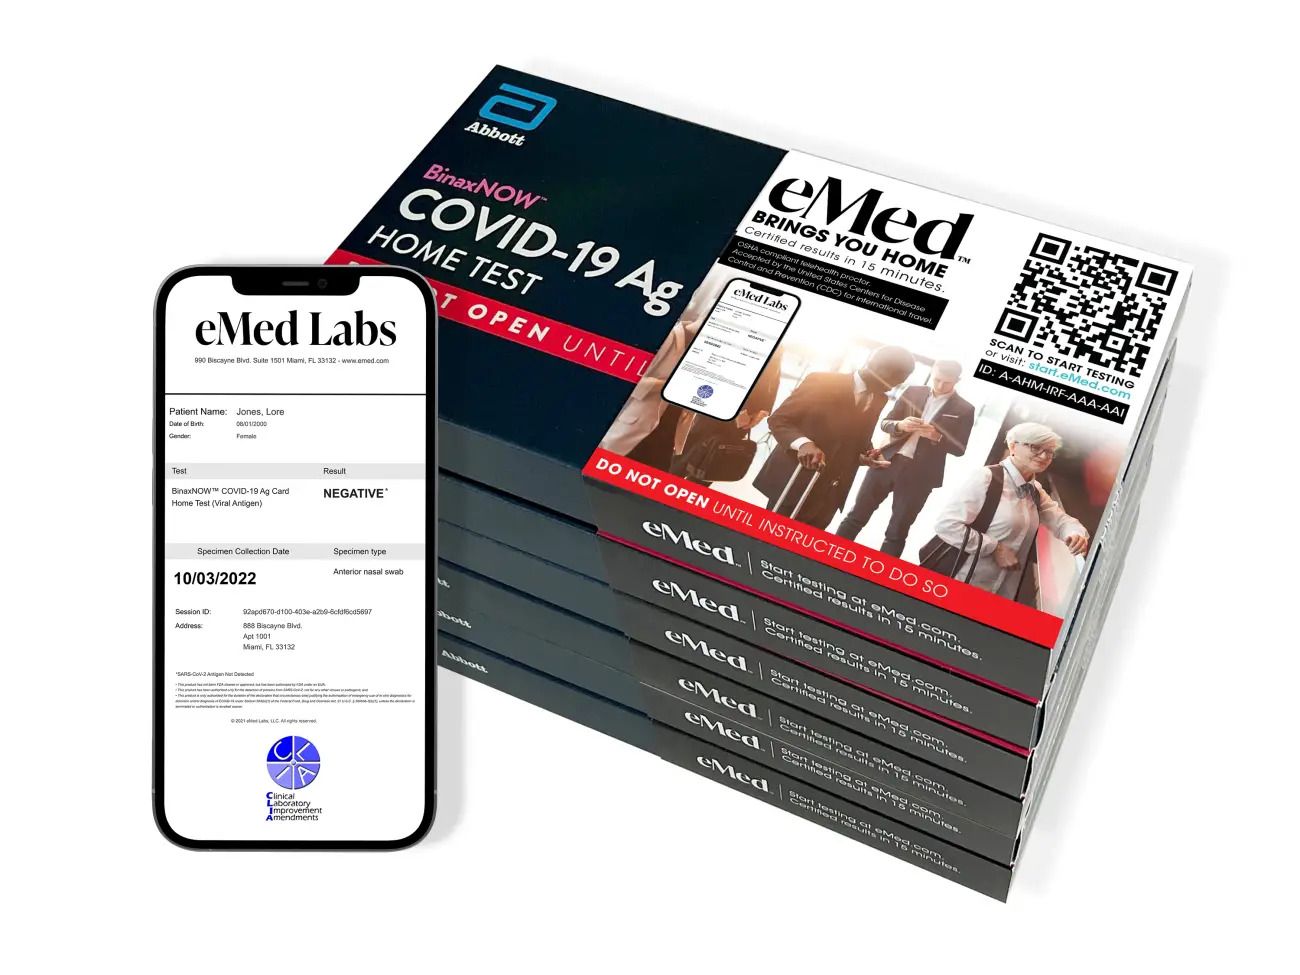 DISCAbbott BinaxNOW™ COVID-19 Antigen Card Home Test with eMed Telehealth Services - 6 Pack for  Employees